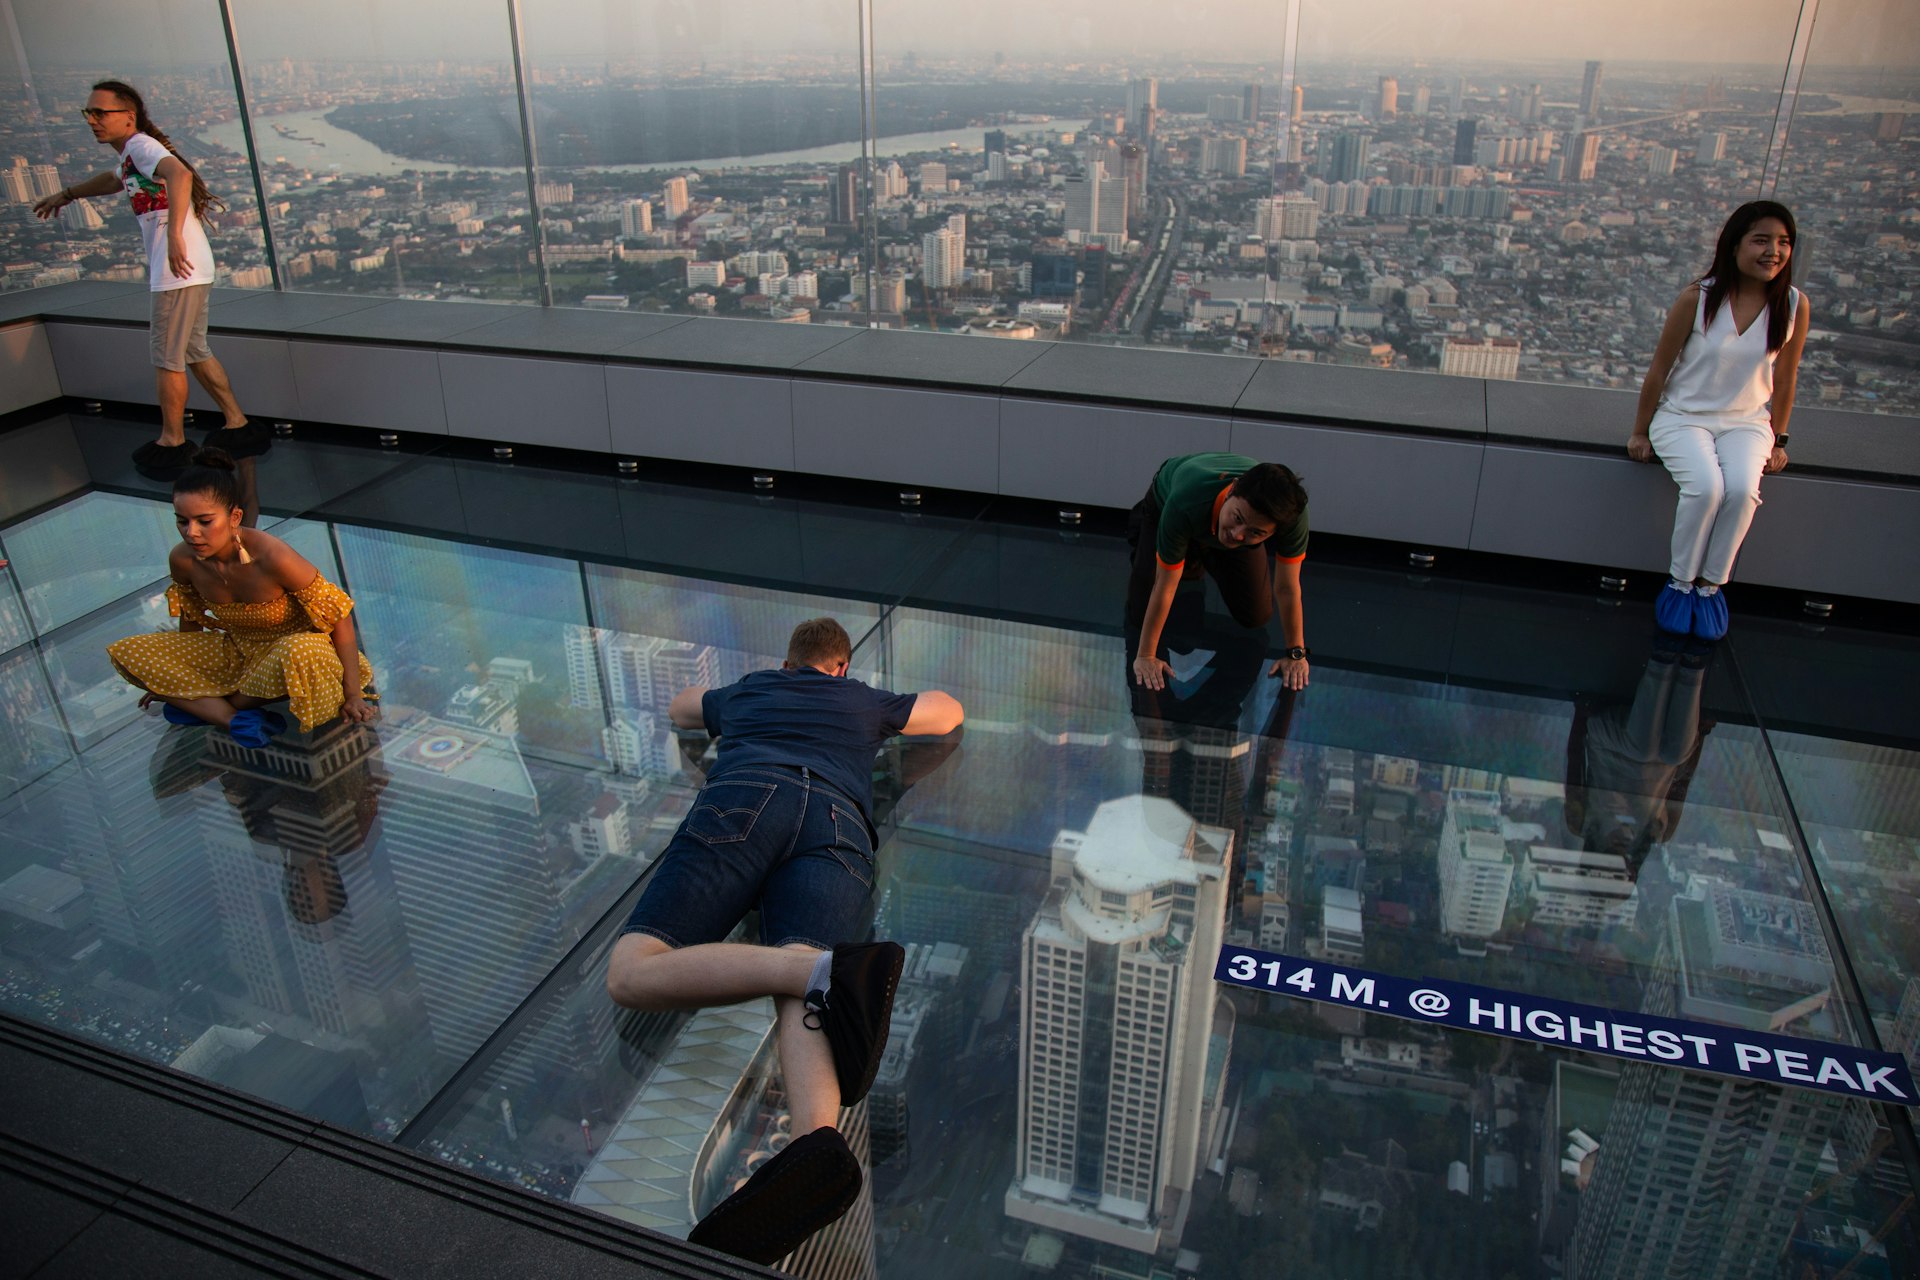 Visitors sit and lie on the glass floor at the rooftop of the King Power Mahanakhon building in Bangkok as the lights of the city skyline, some way below, glitter.